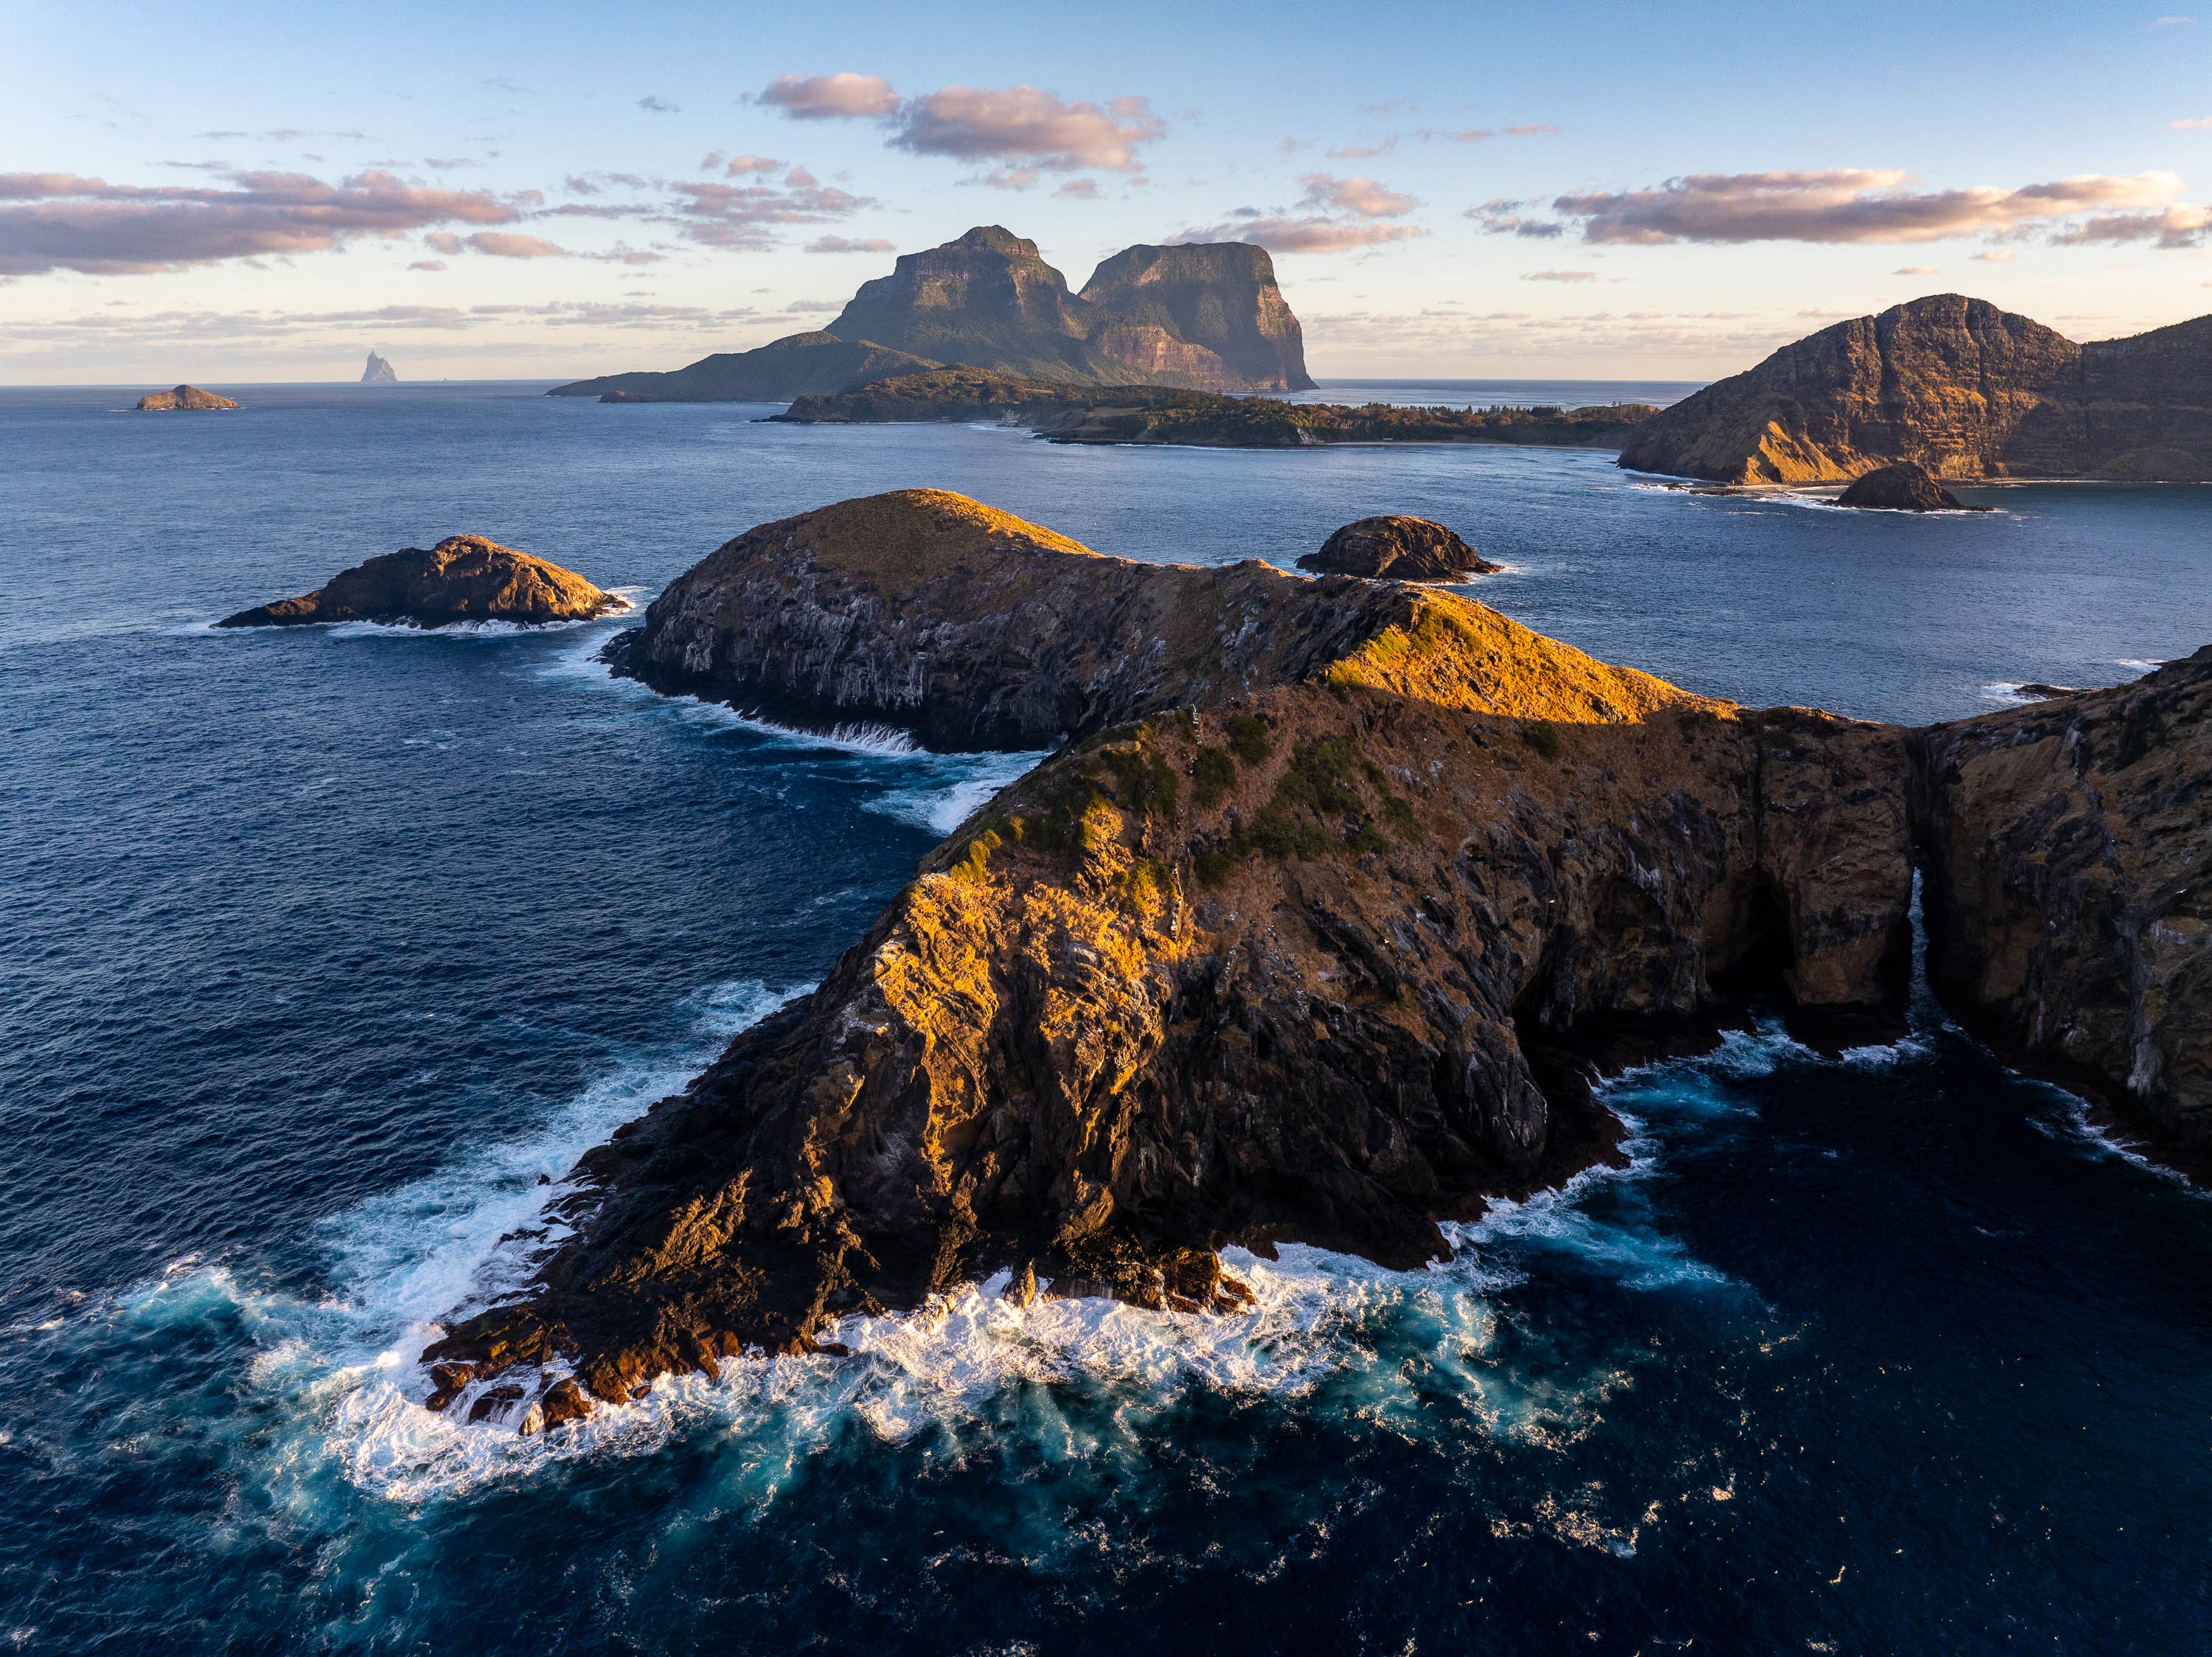 The Admiralty Group, Lord Howe Island